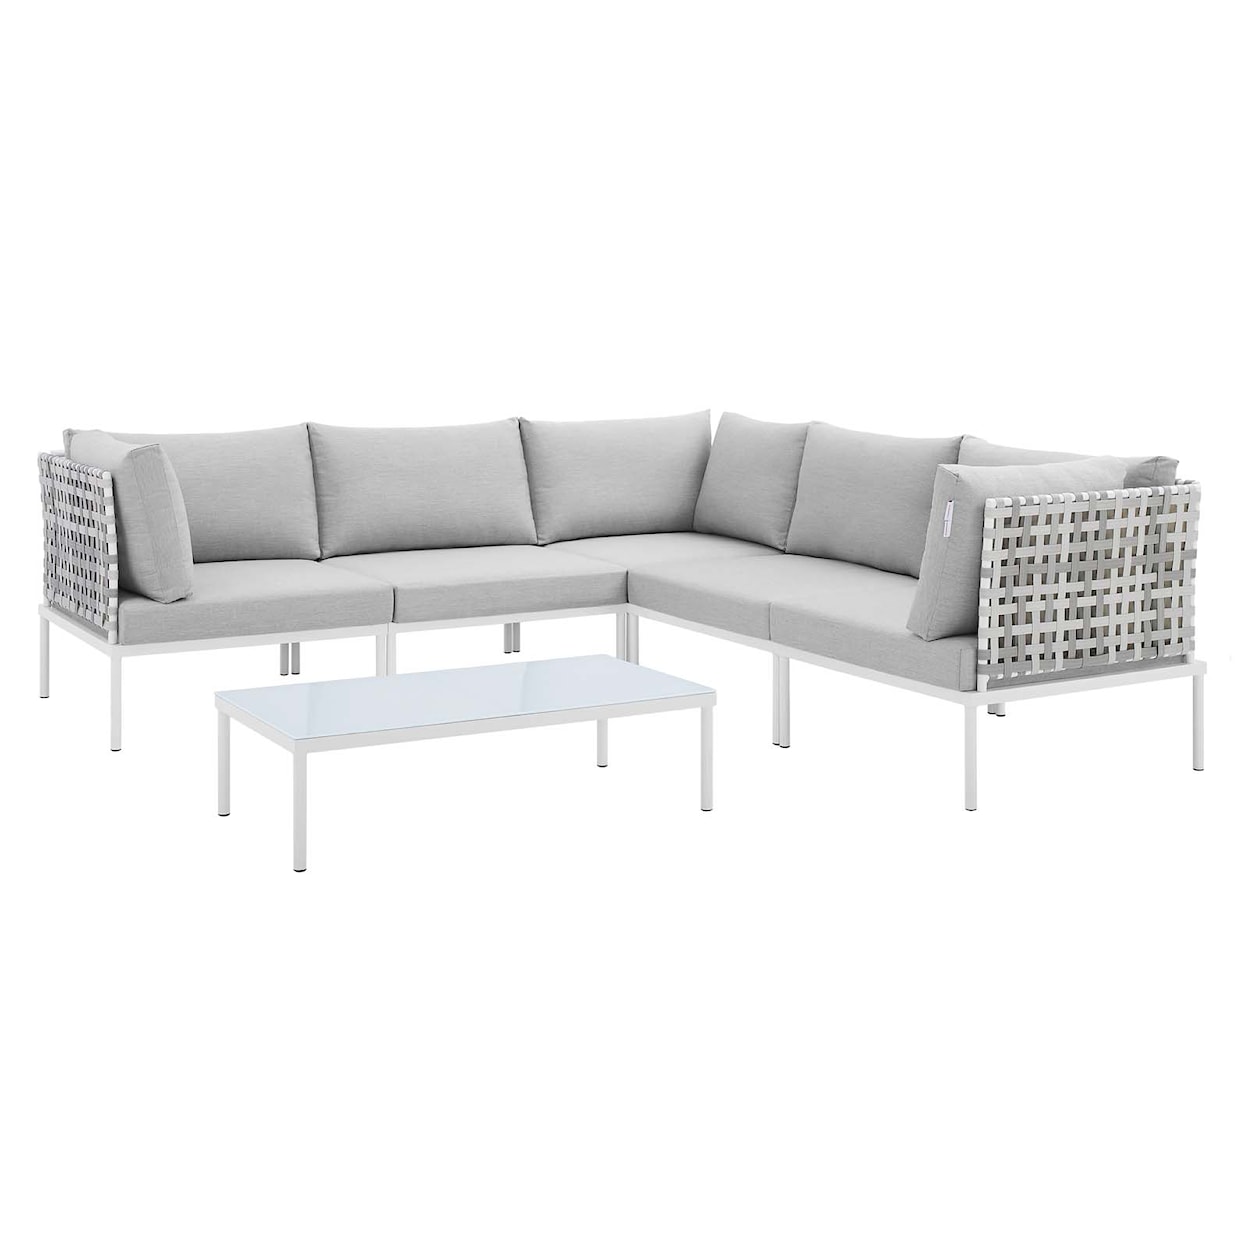 Modway Harmony Outdoor 6-Piece Aluminum Sectional